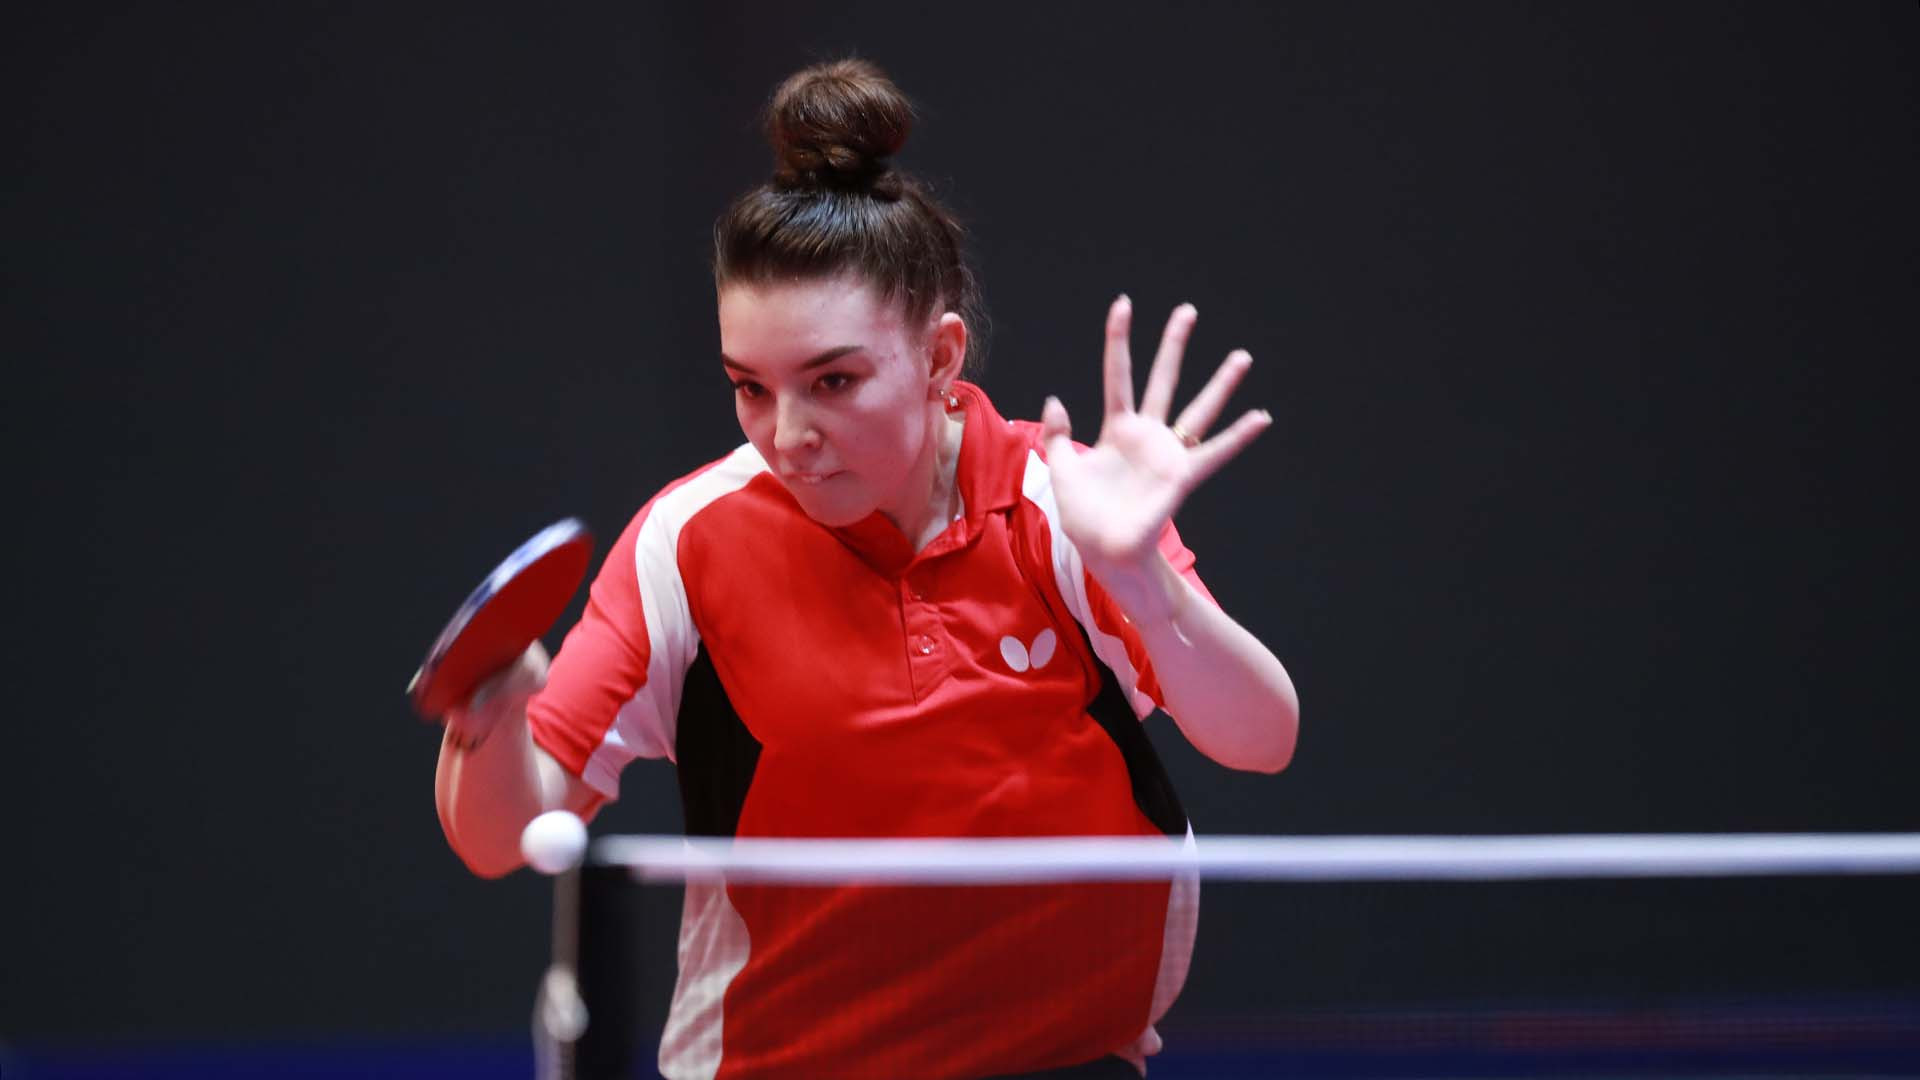 Russia’s Mariia Tailakova was unable to help prevent Japan from reaching the girls' team final at the ITTF World Junior Championships in Australia ©ITTF